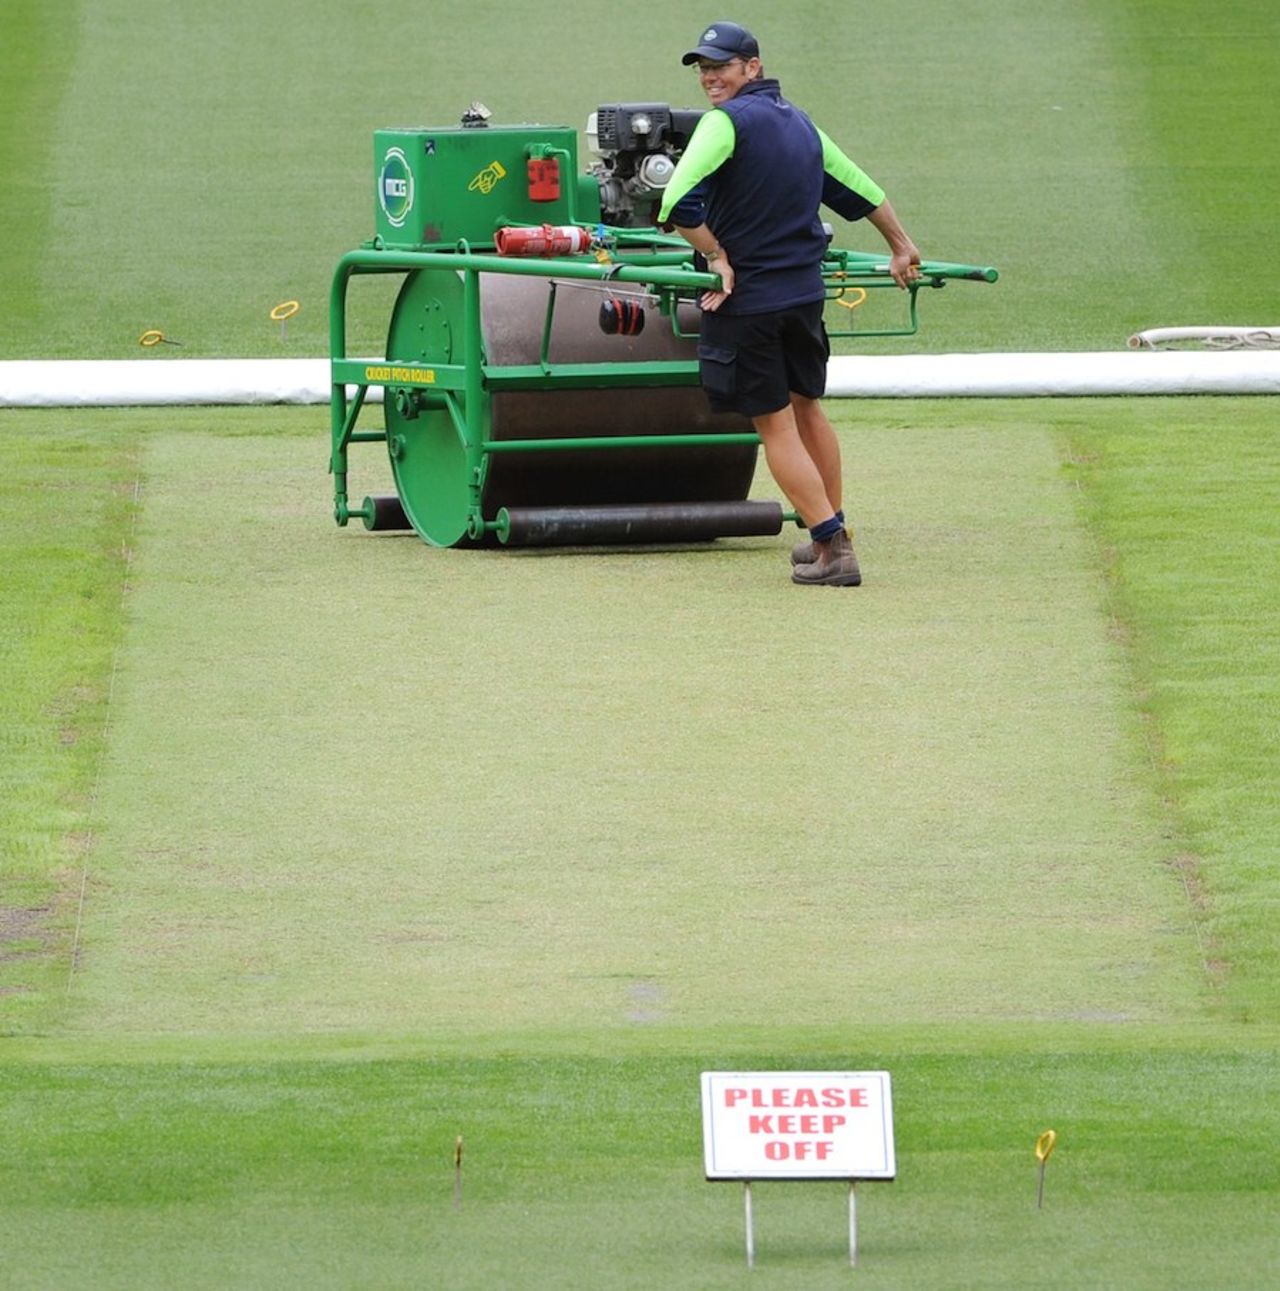 The pitch at the MCG has a lot of grass five days ahead of the Boxing Day Test, Melbourne, December 21, 2010